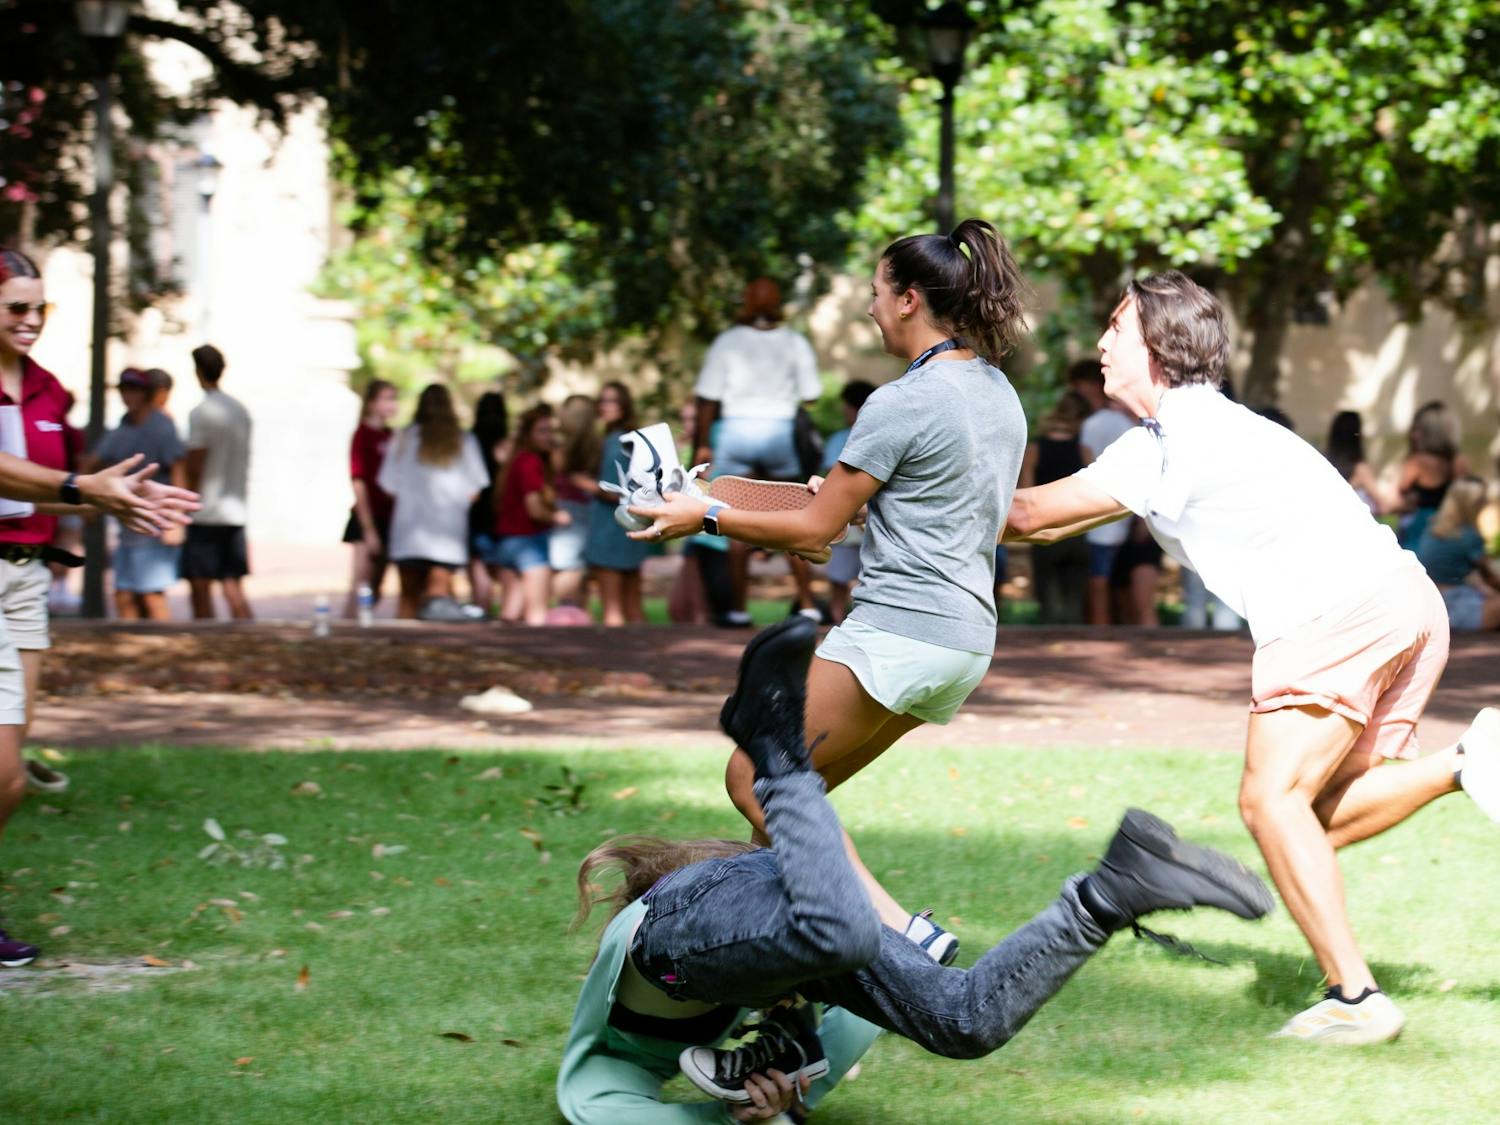 A first-year student falls as her fellow group members sprint to give their orientation leader a shoe during an orientation session on July 20, 2022. This game is played during orientation sessions throughout the summer to help new students have fun and make friends before starting their freshman year in the fall.&nbsp;